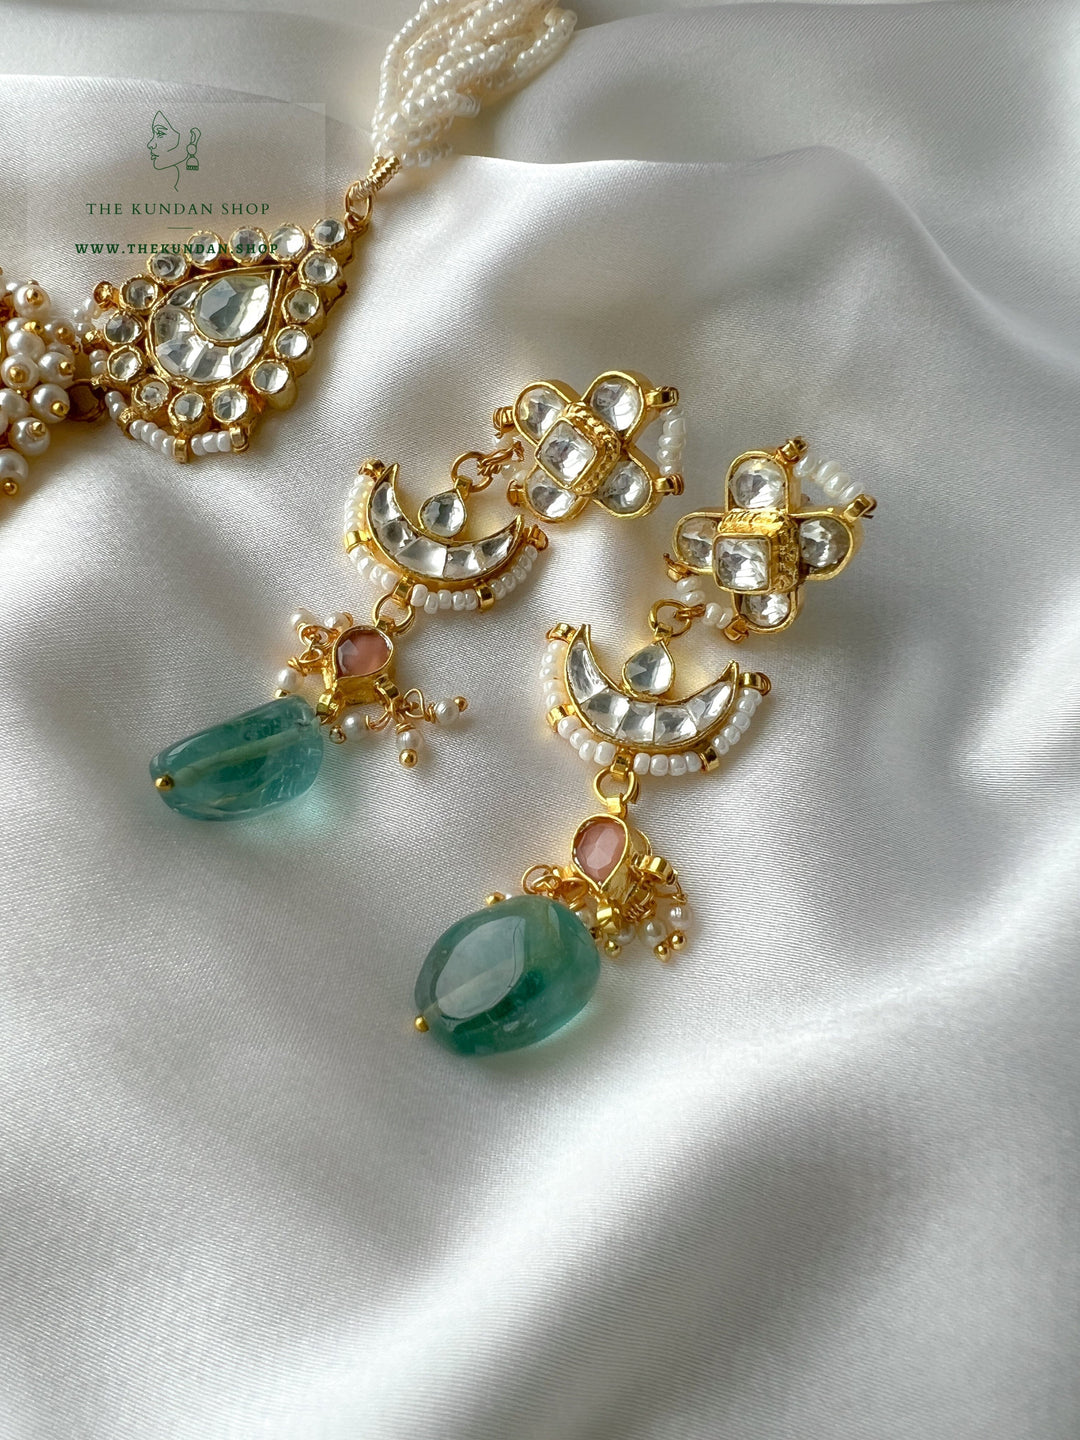 Lighter Days in Peach & Green Necklace Sets THE KUNDAN SHOP 